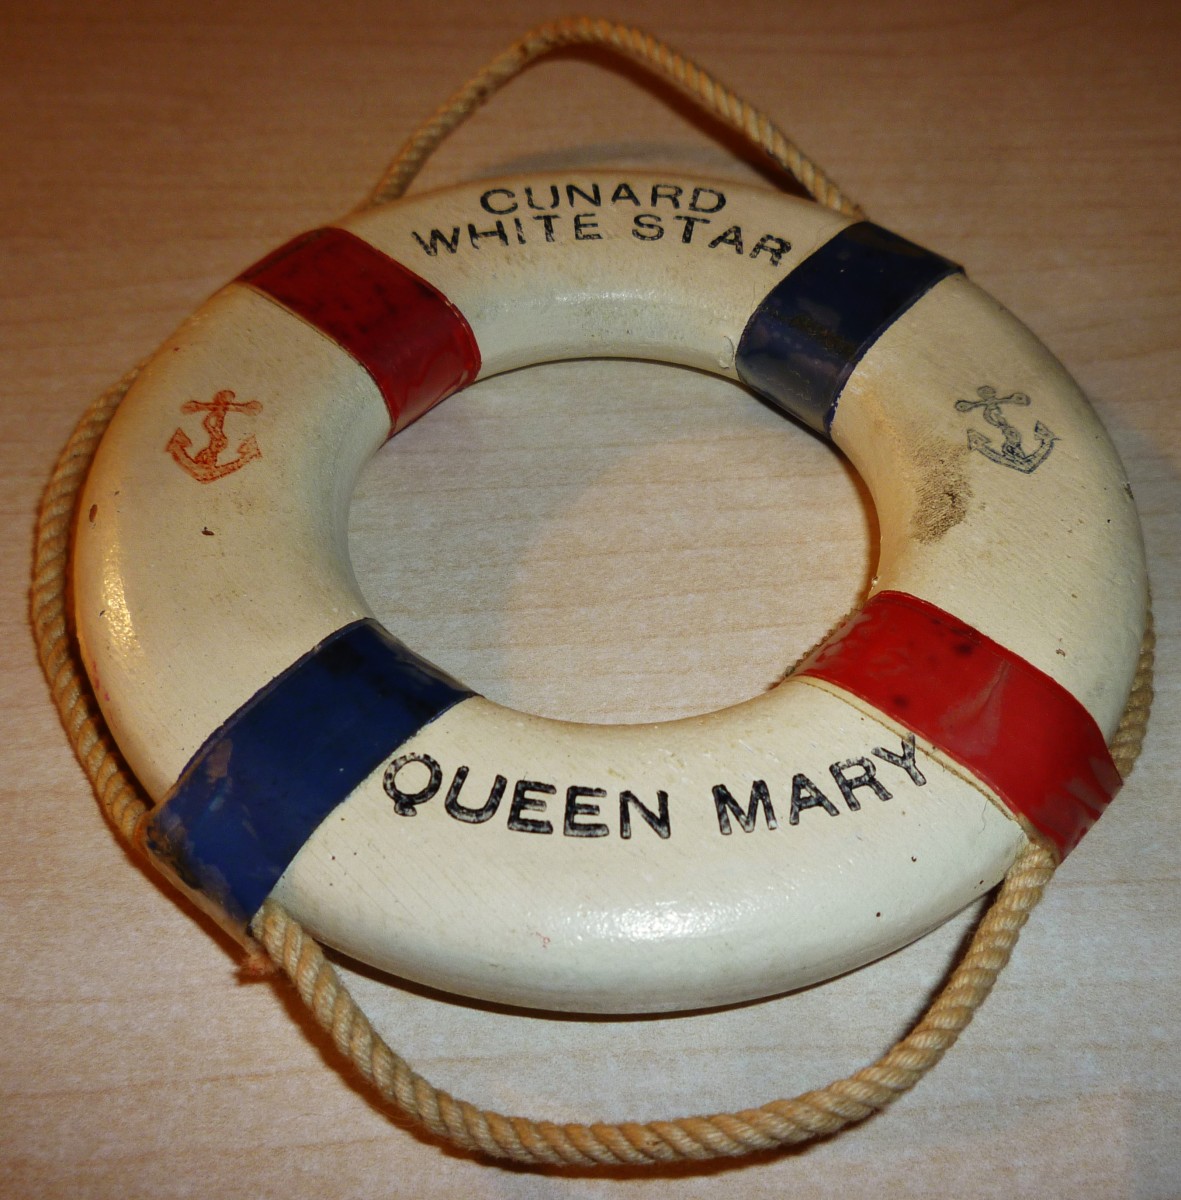 After reading The Lingering Darkness, you will understand why I included this Queen Mary ship souvenir. Amazingly, my husband's father returned from service in Europe after World War II on the Queen Mary.